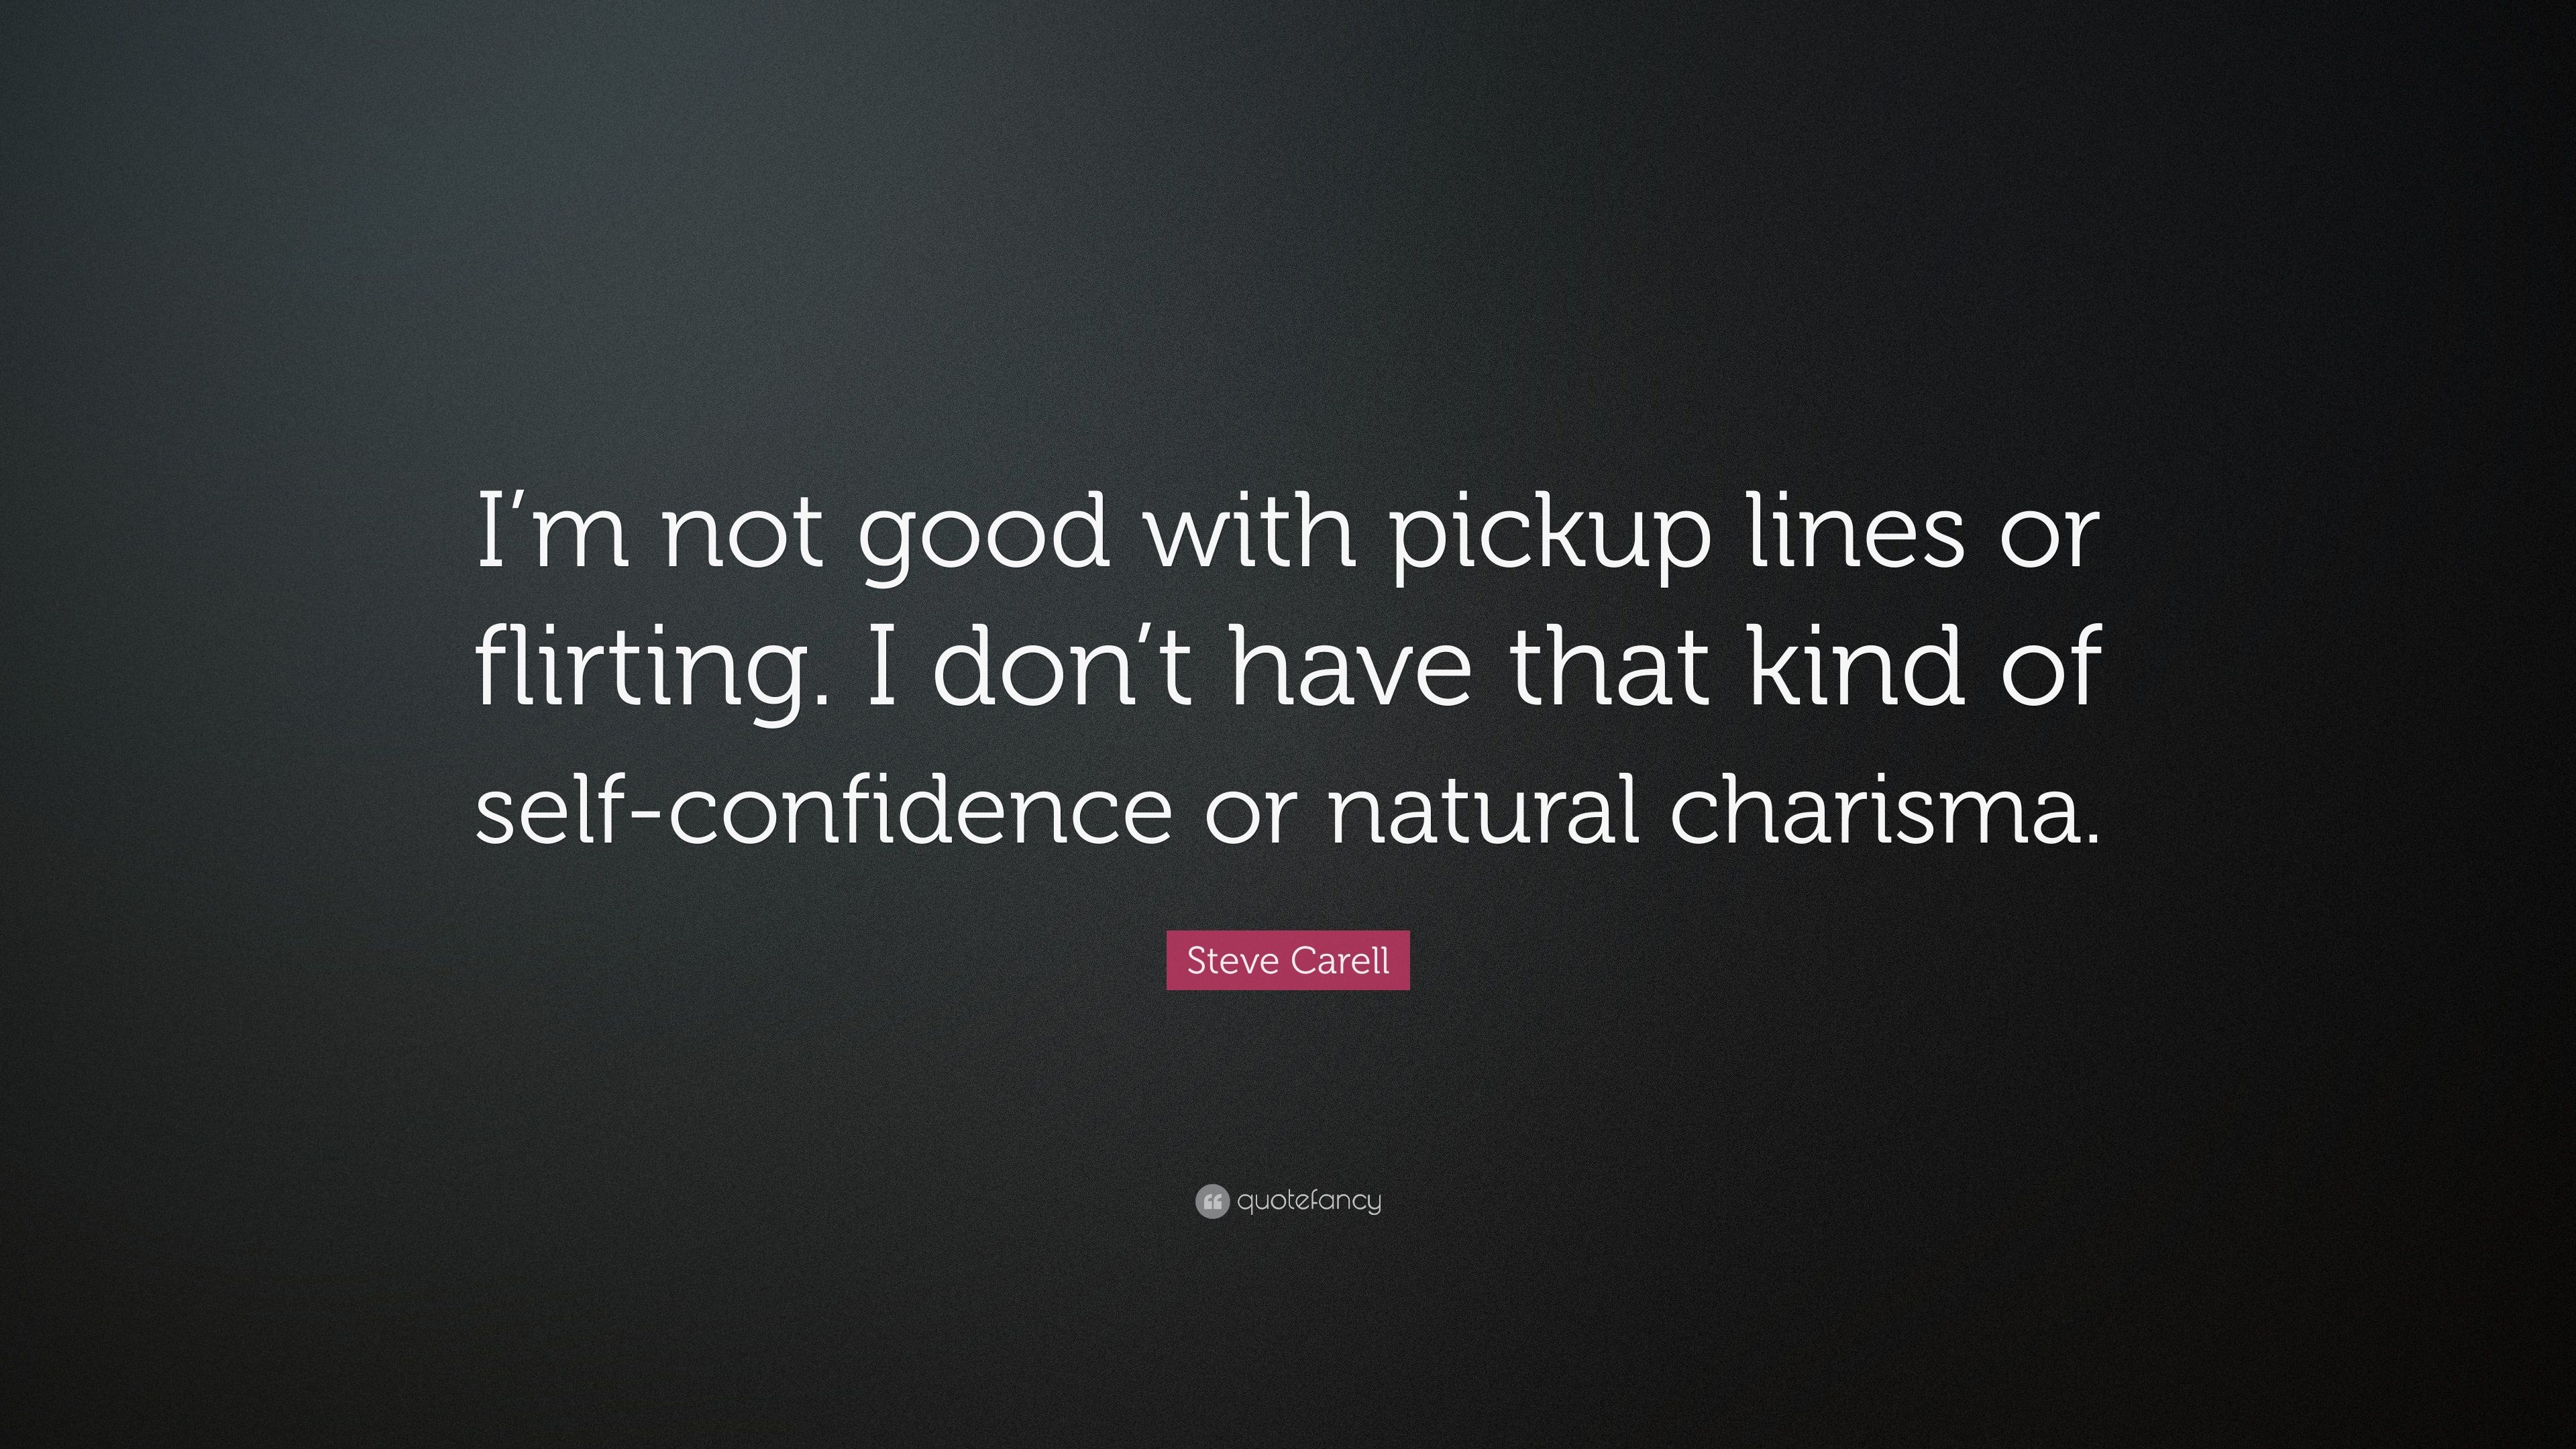 Steve Carell Quote: “I'm Not Good With Pickup Lines Or Flirting. I Don't Have That Kind Of Self Confidence Or Natural Charisma.” (7 Wallpaper)